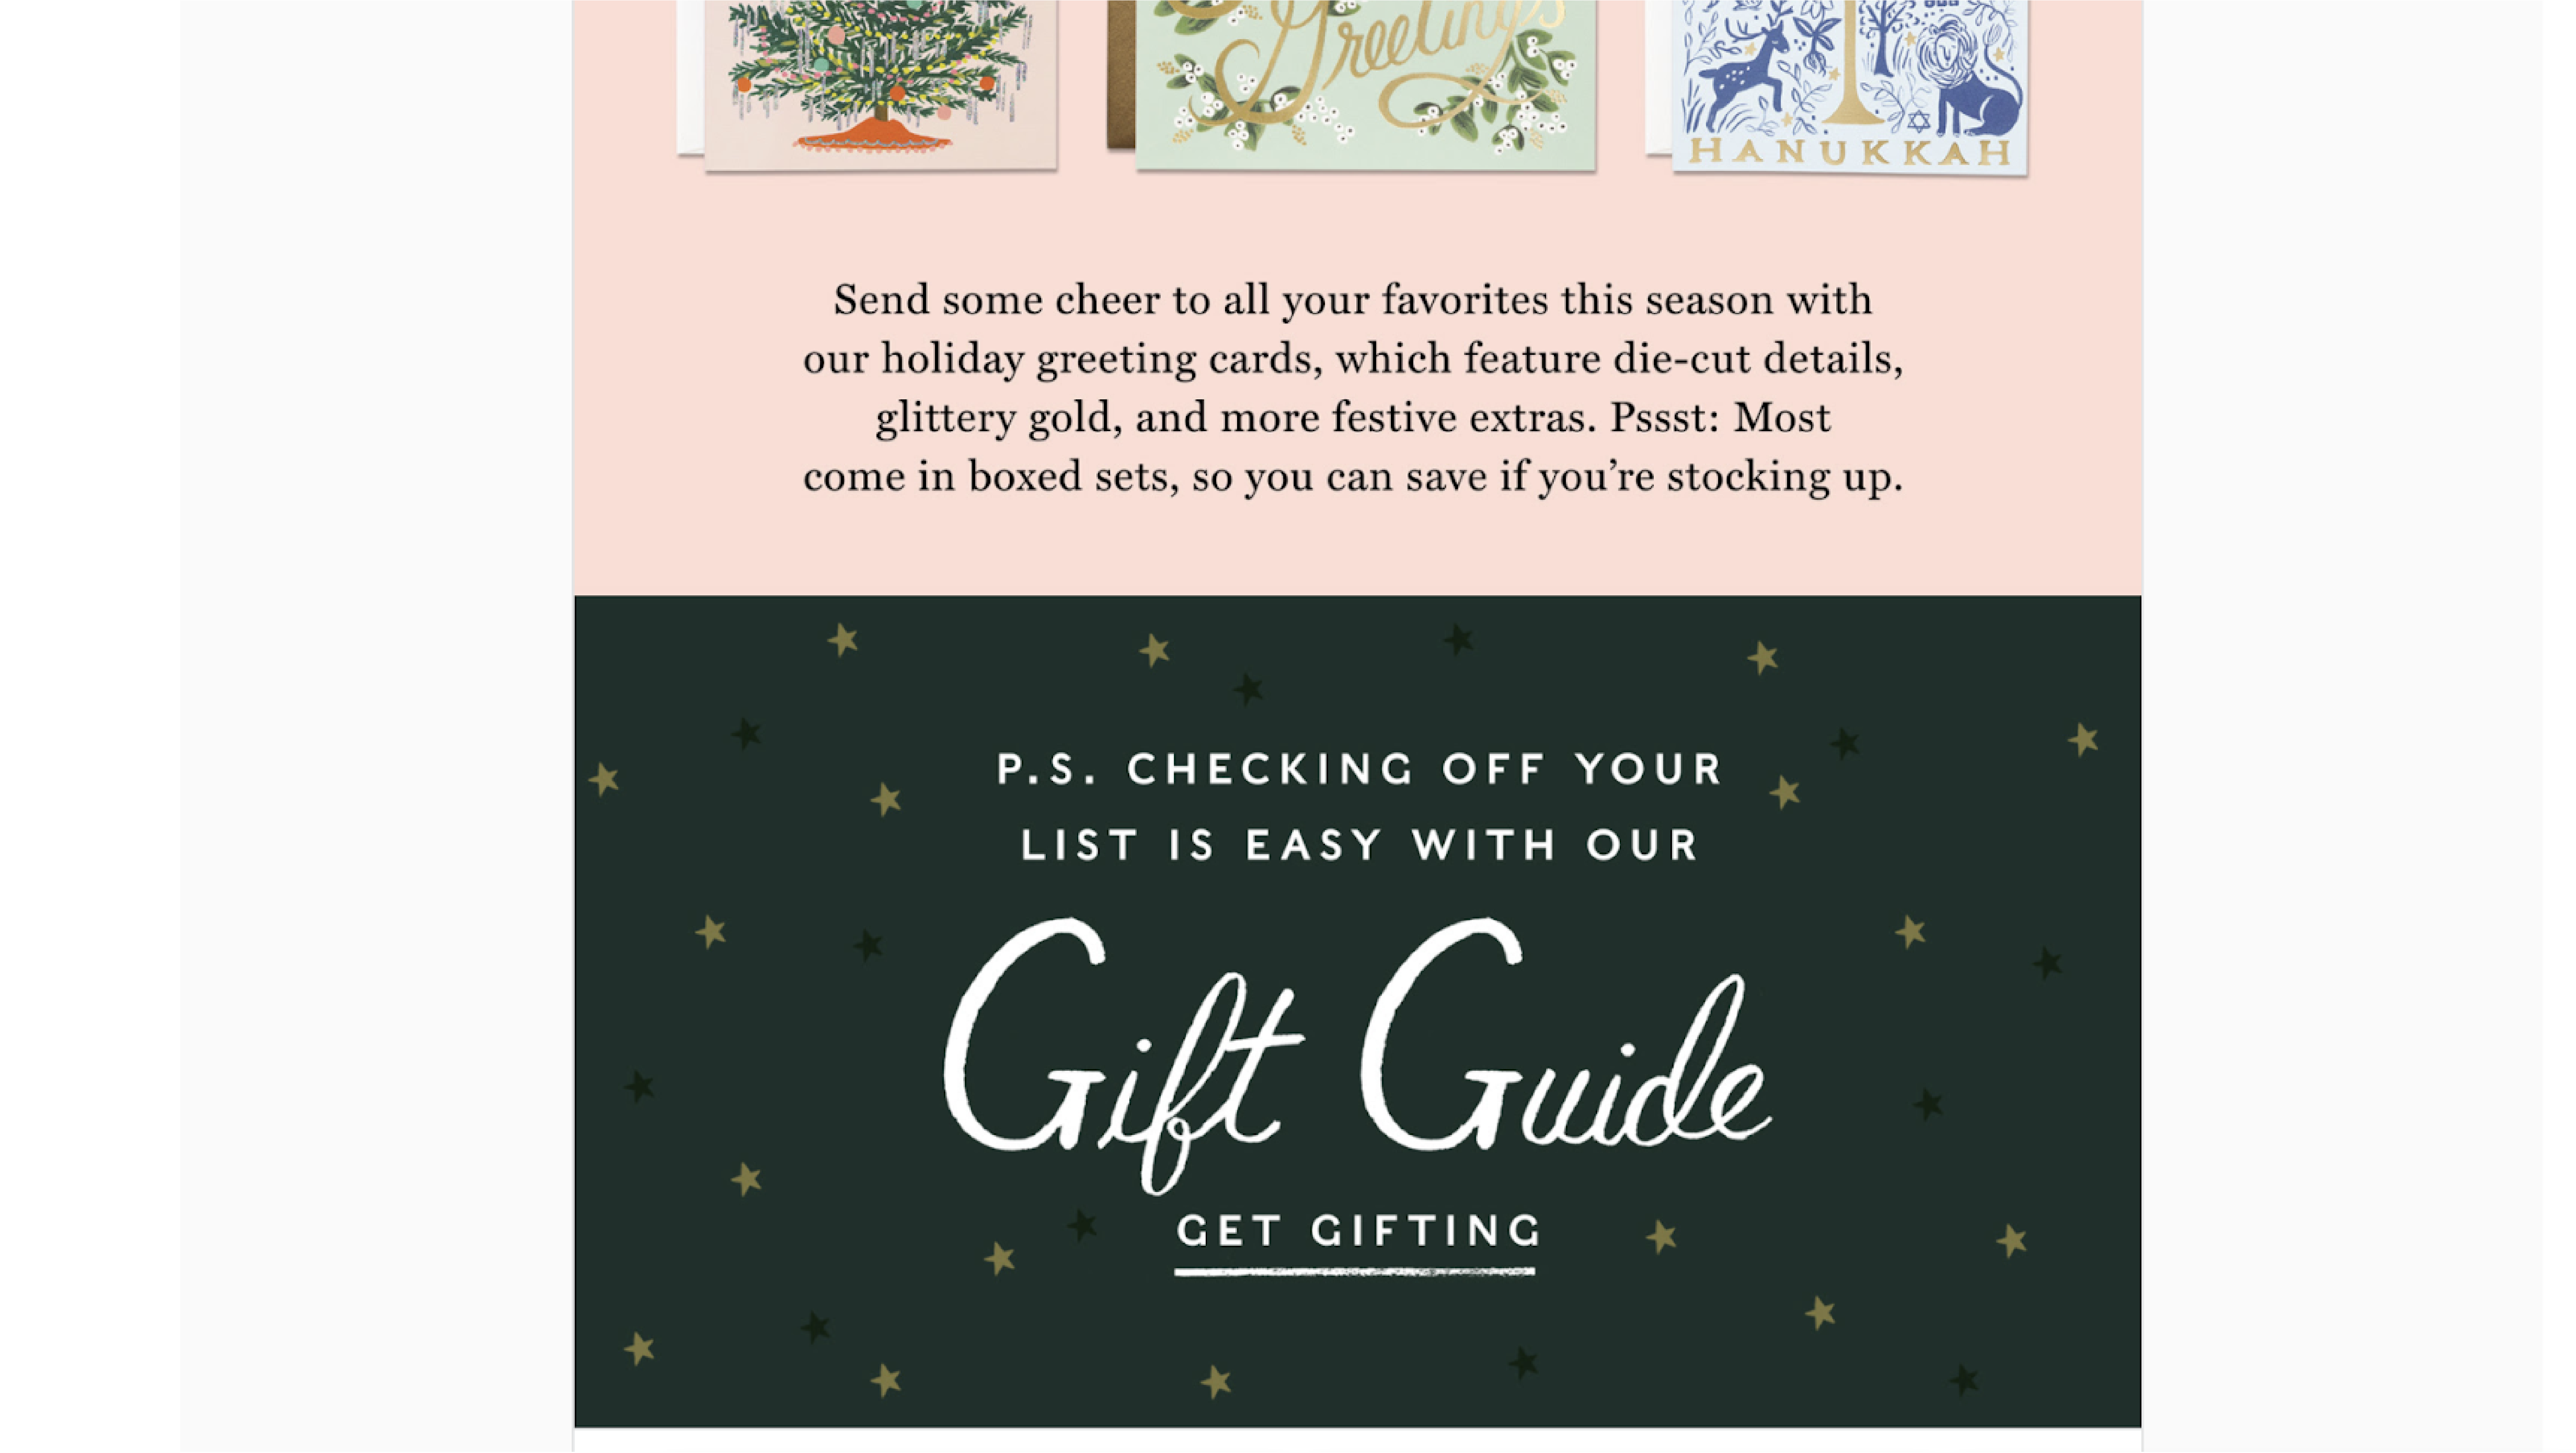 Example of Rifle Paper CO.'s holiday email teasing their gif guide